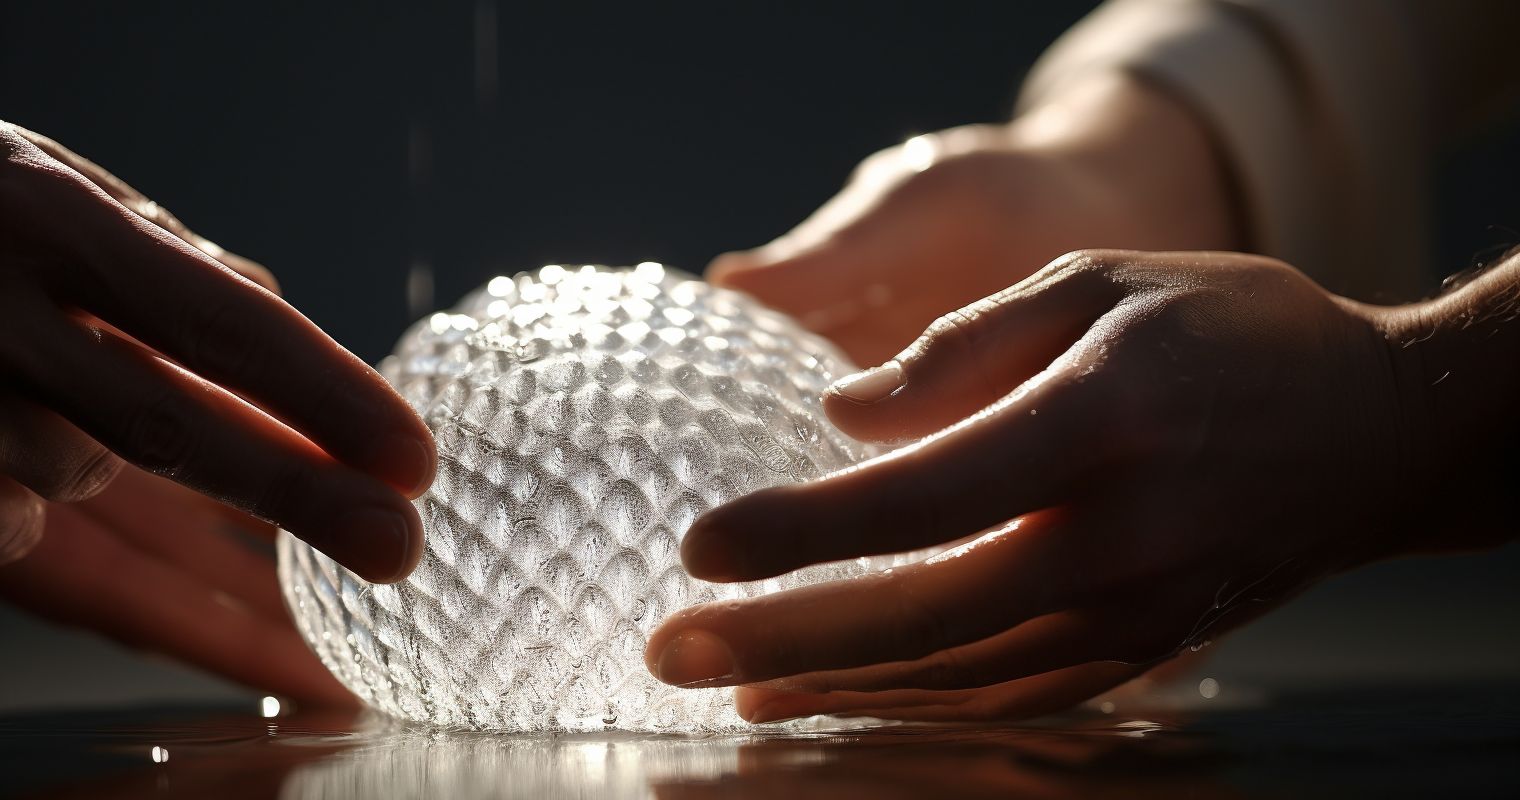 Protecting Fragile Items with Bubble Wrap